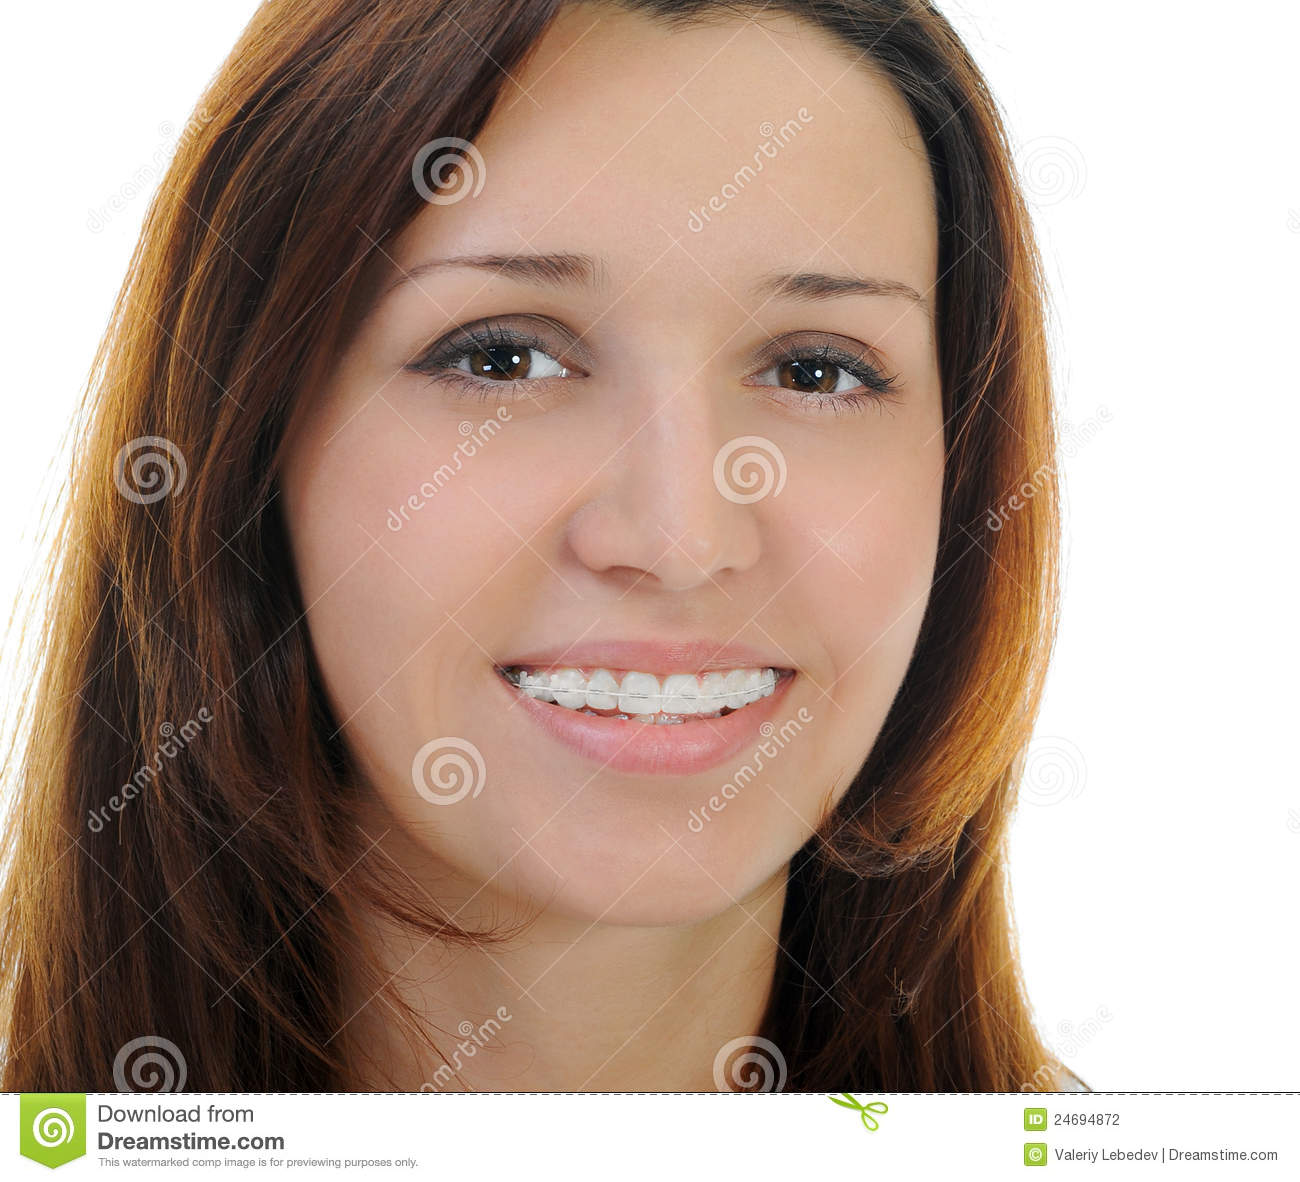 Portrait Of Beautiful Teen Girl In Braces Isolated On A White